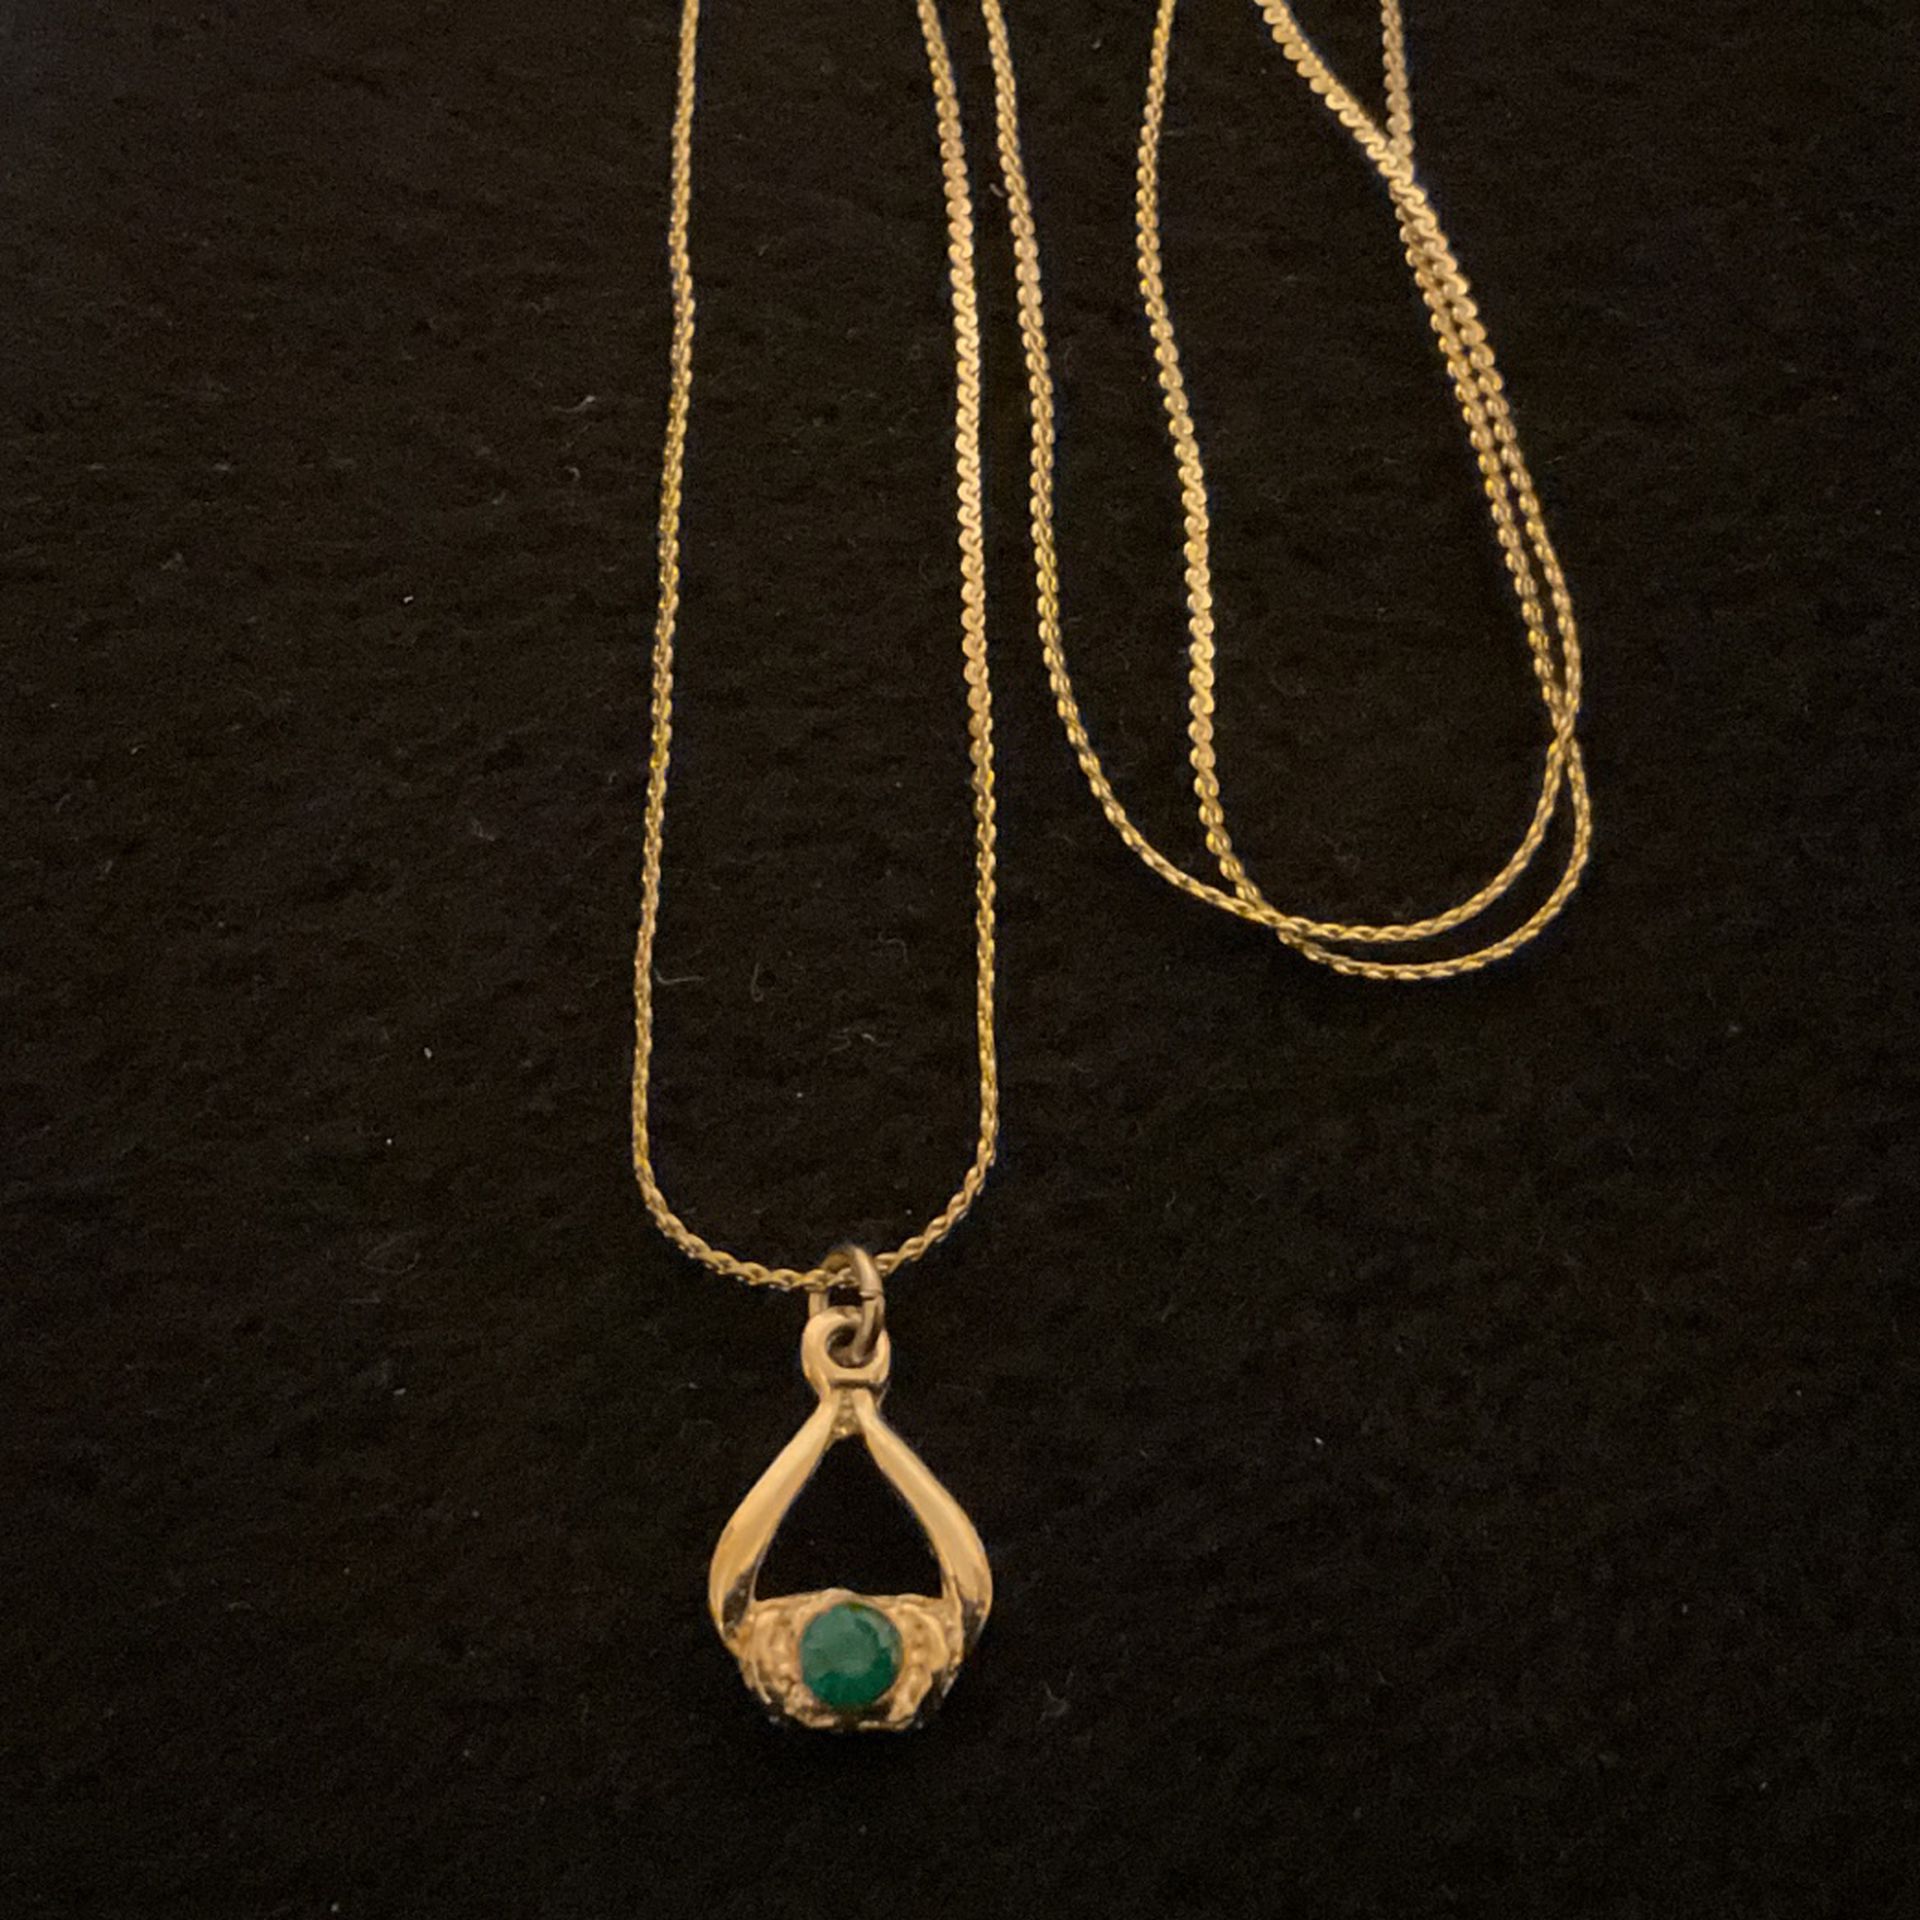 18” Goldtone Necklace And Pendant With Emerald Stone